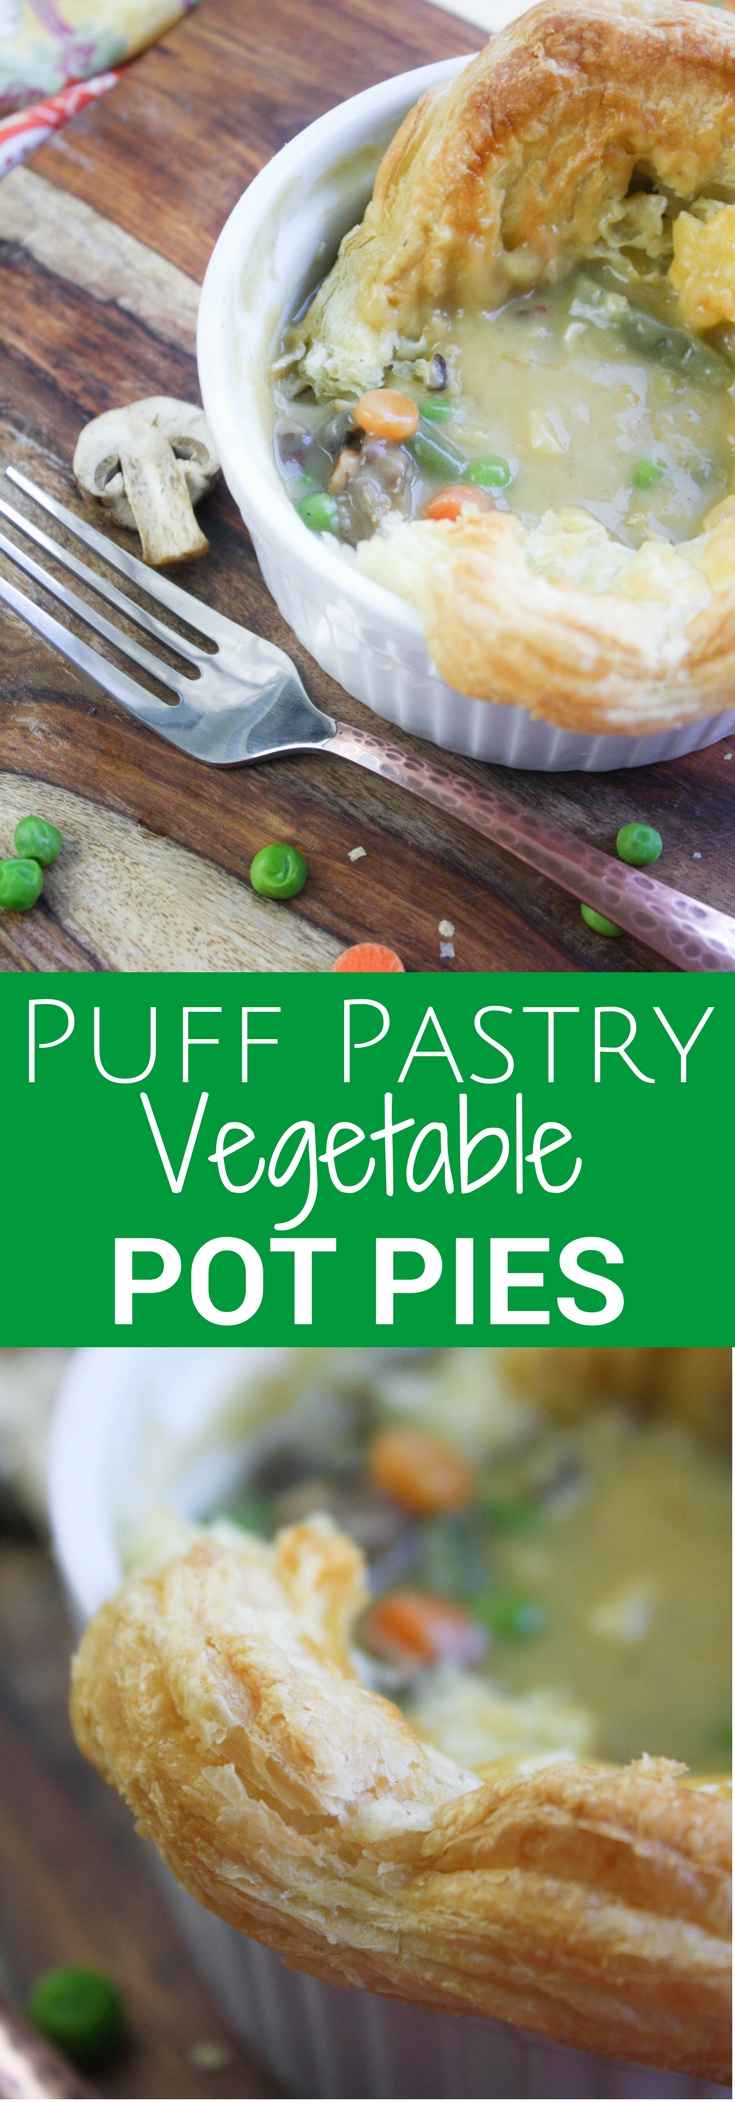 Easy Puffy Pastry Vegetable Pot Pies are a wonderful dish when you're looking for a comfort meal. You'll enjoy not only that these puff pastry vegetarian pot pies are easy to make, but delicious, too!